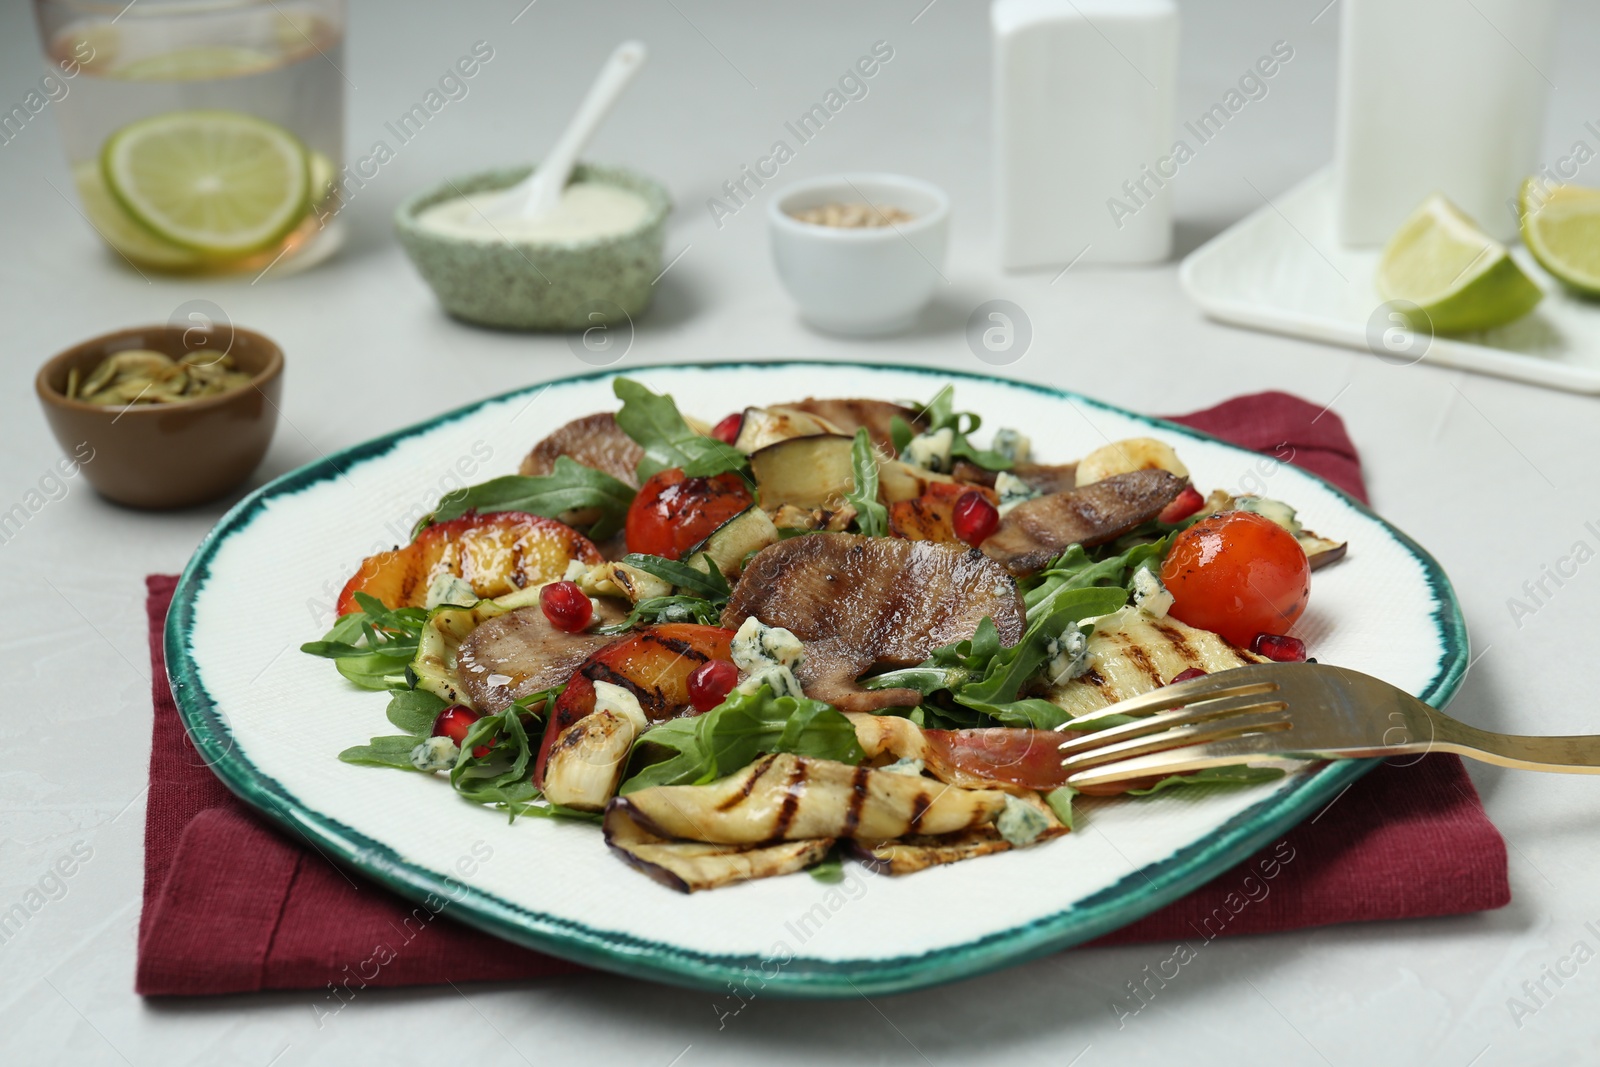 Photo of Delicious salad with beef tongue, grilled vegetables, peach, blue cheese and fork served on white table